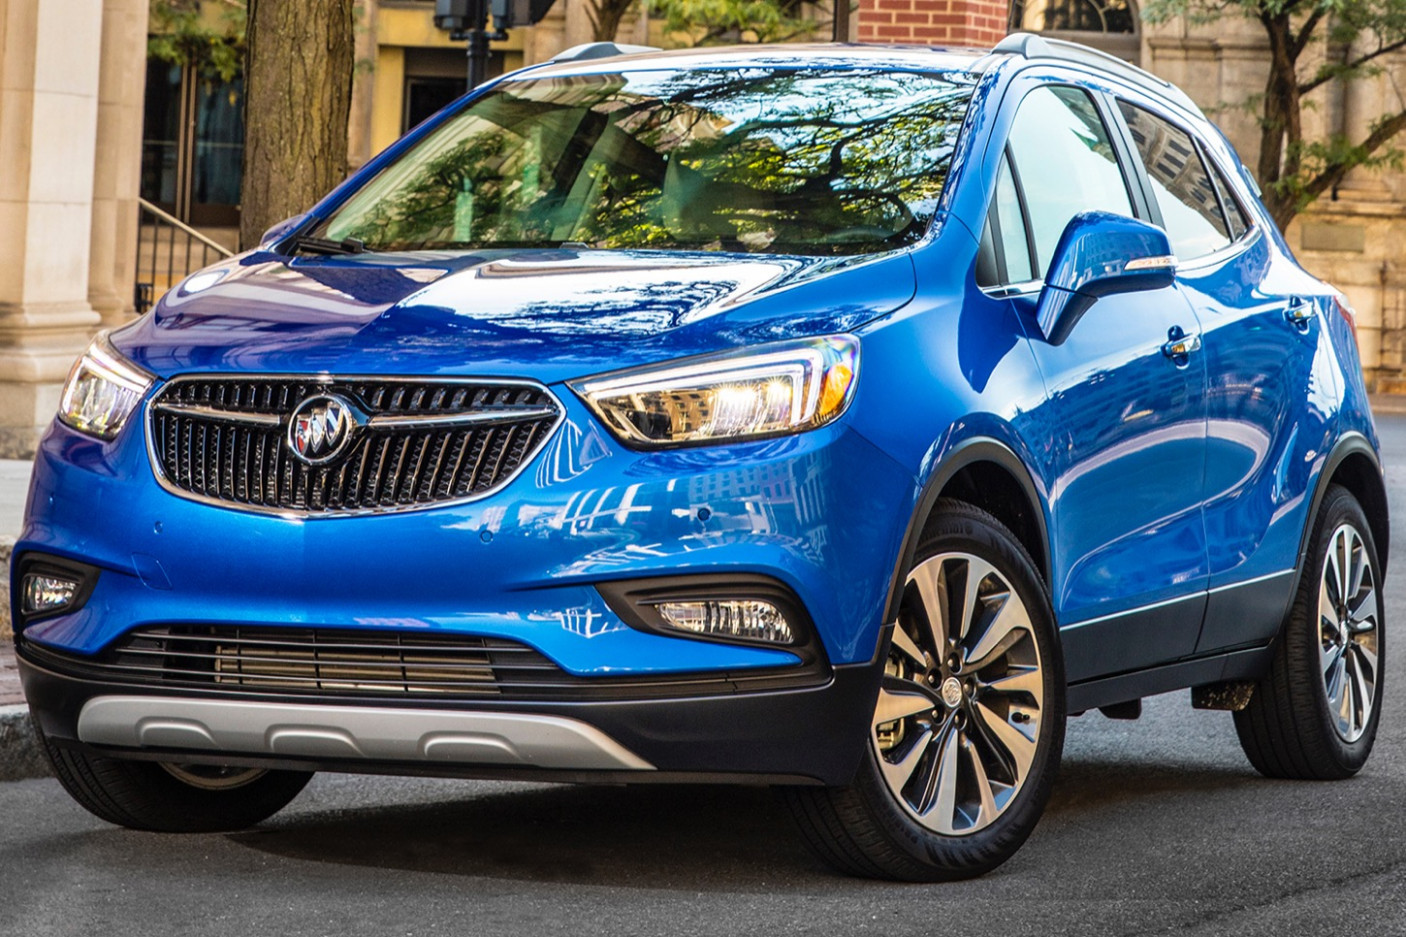 Spesification When Does The 2022 Buick Encore Come Out